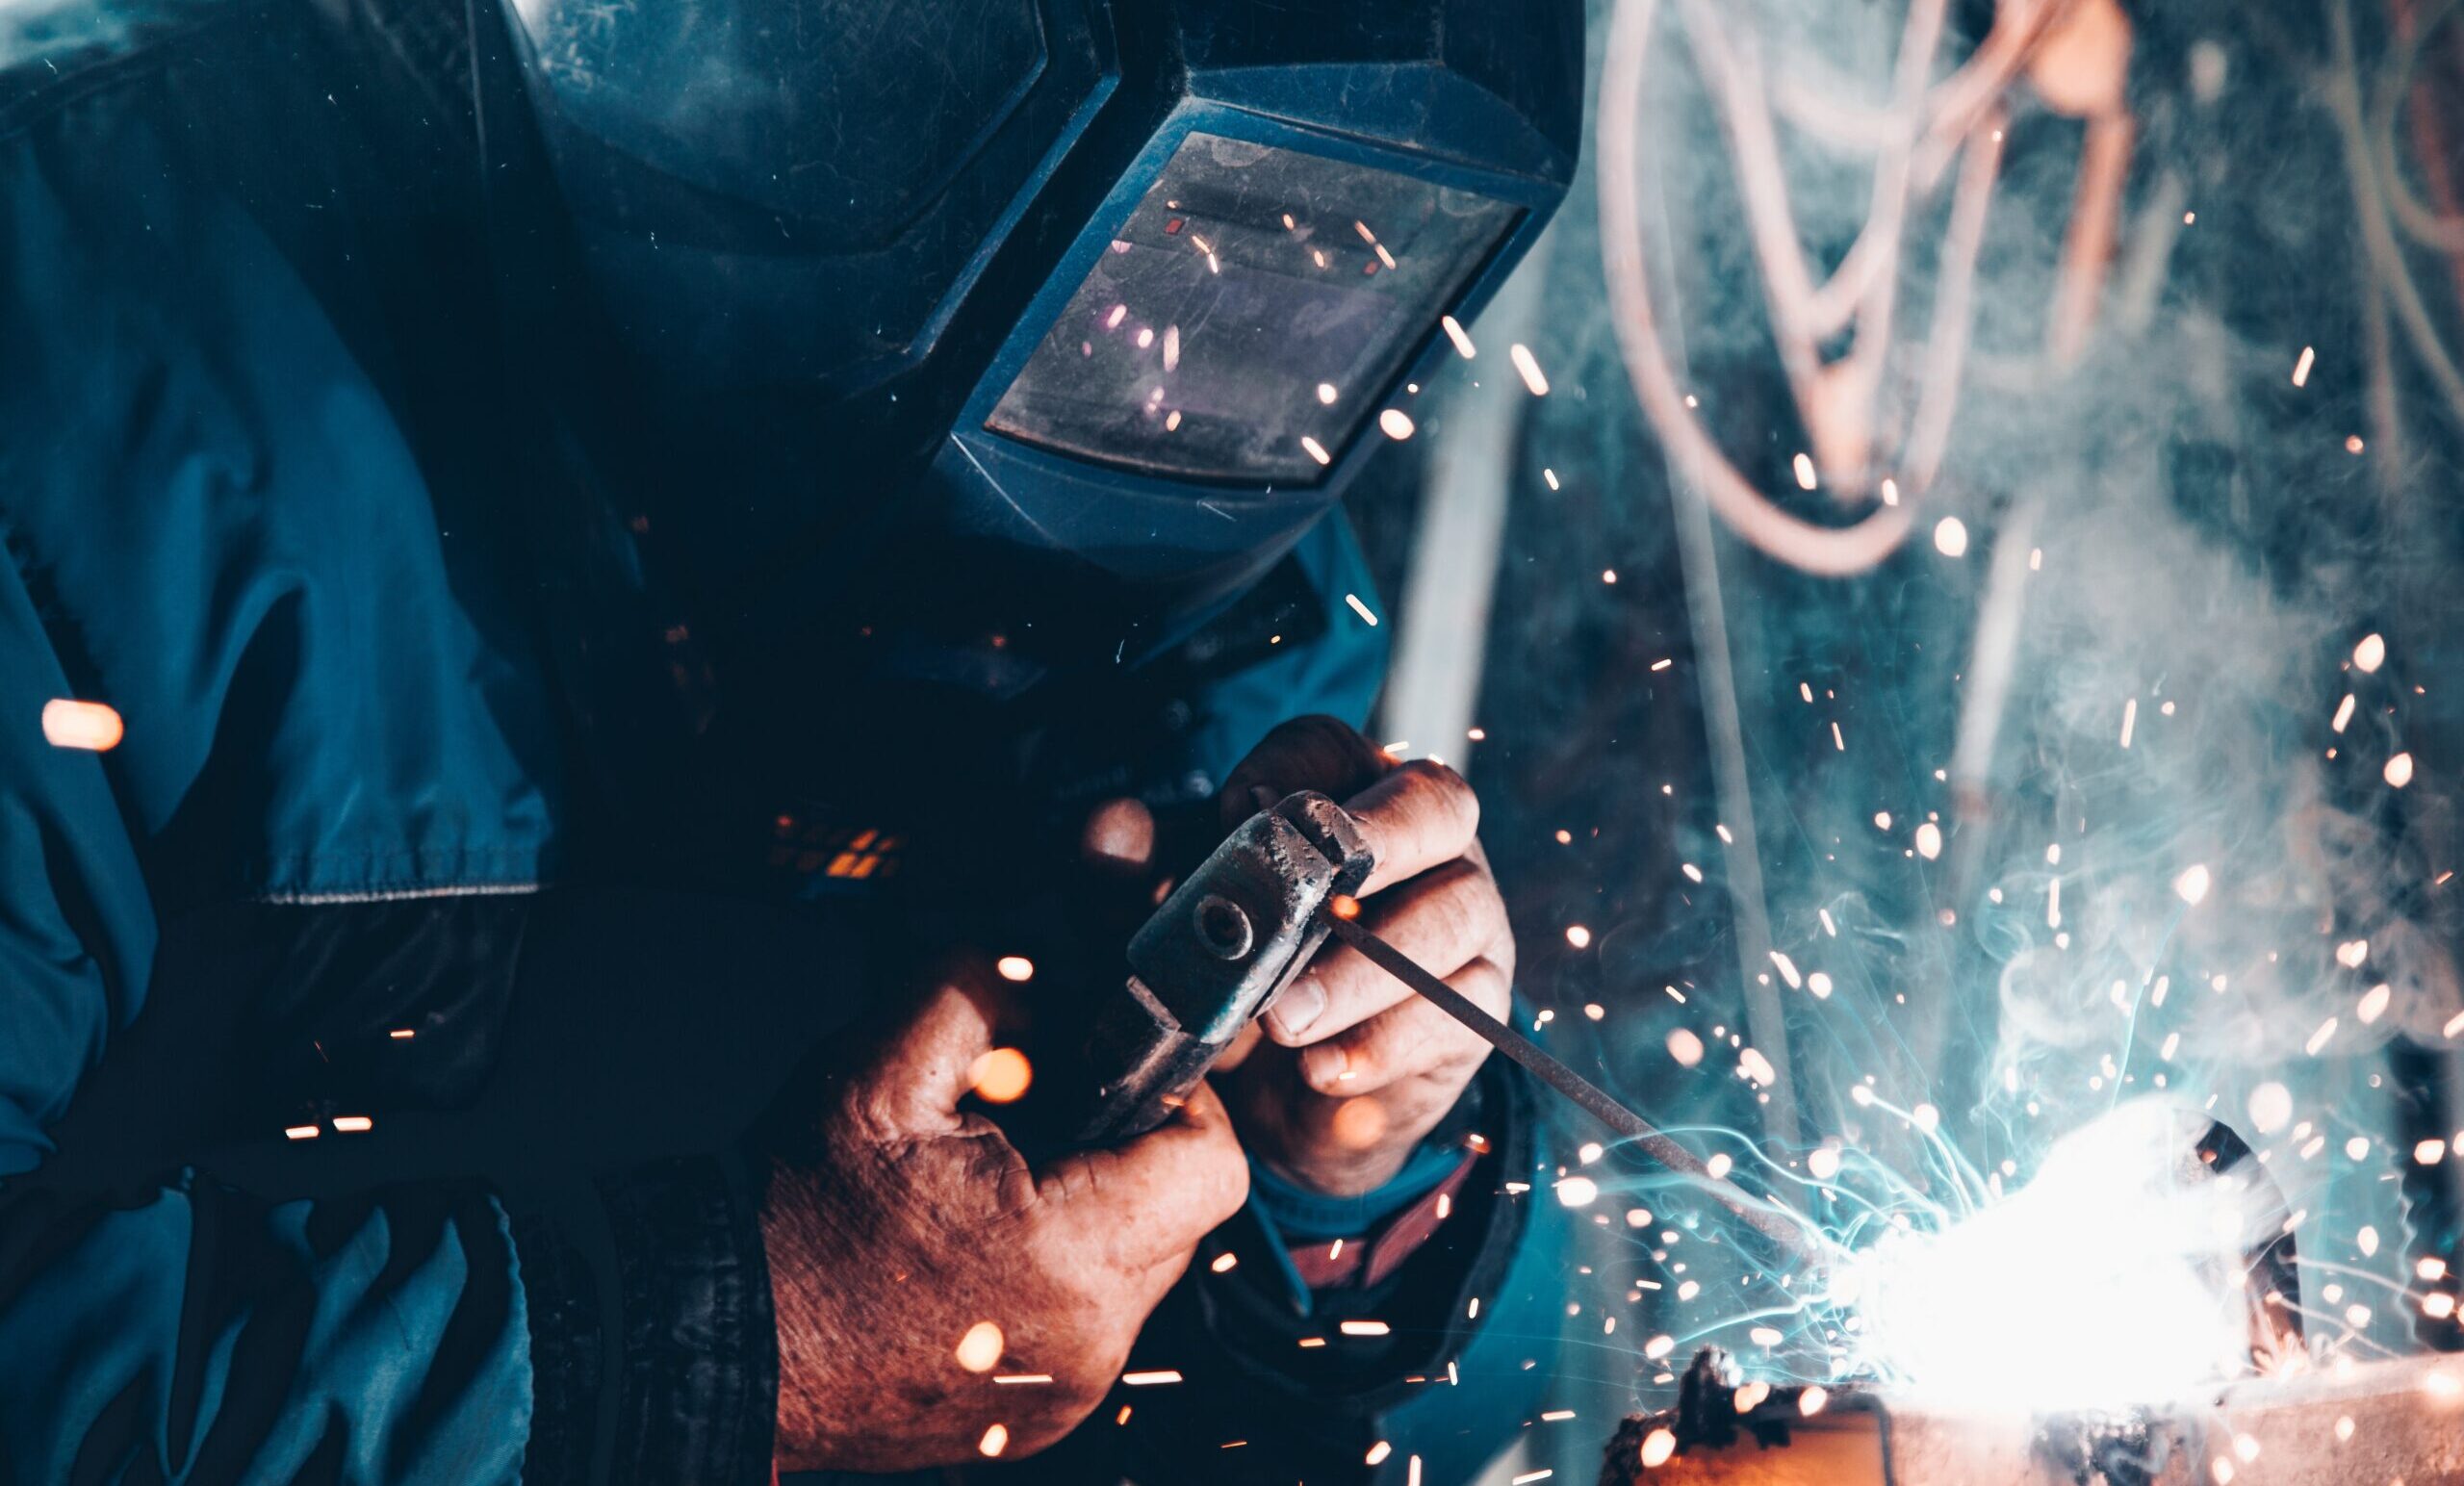 Close up of a man wearing PPE and working on a welding project.